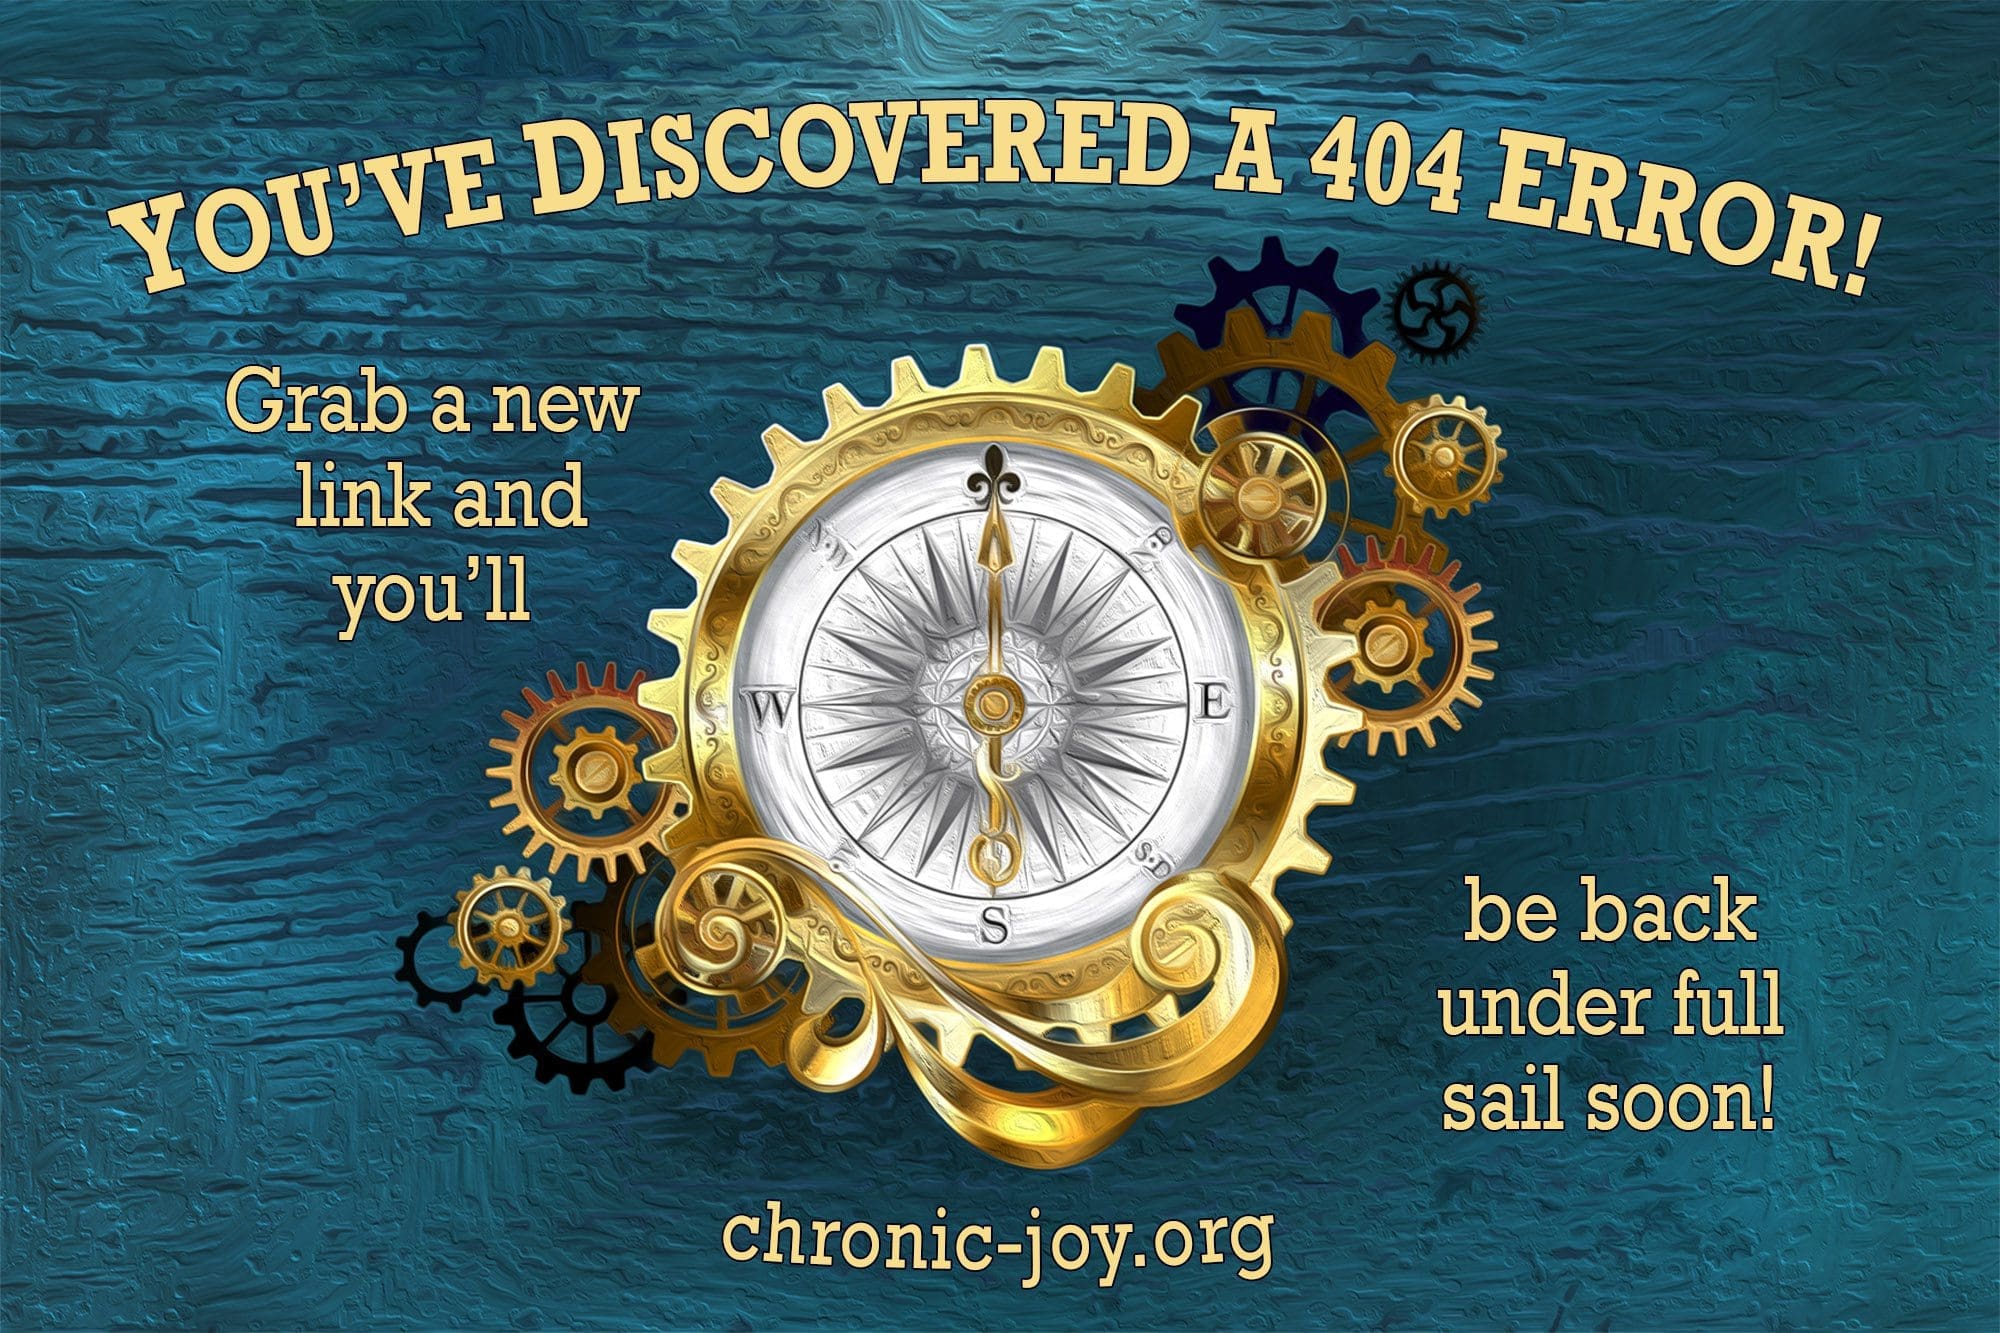 "You've discovered a 404 Error! Grab a new link and you'll be back under full sail soon!"